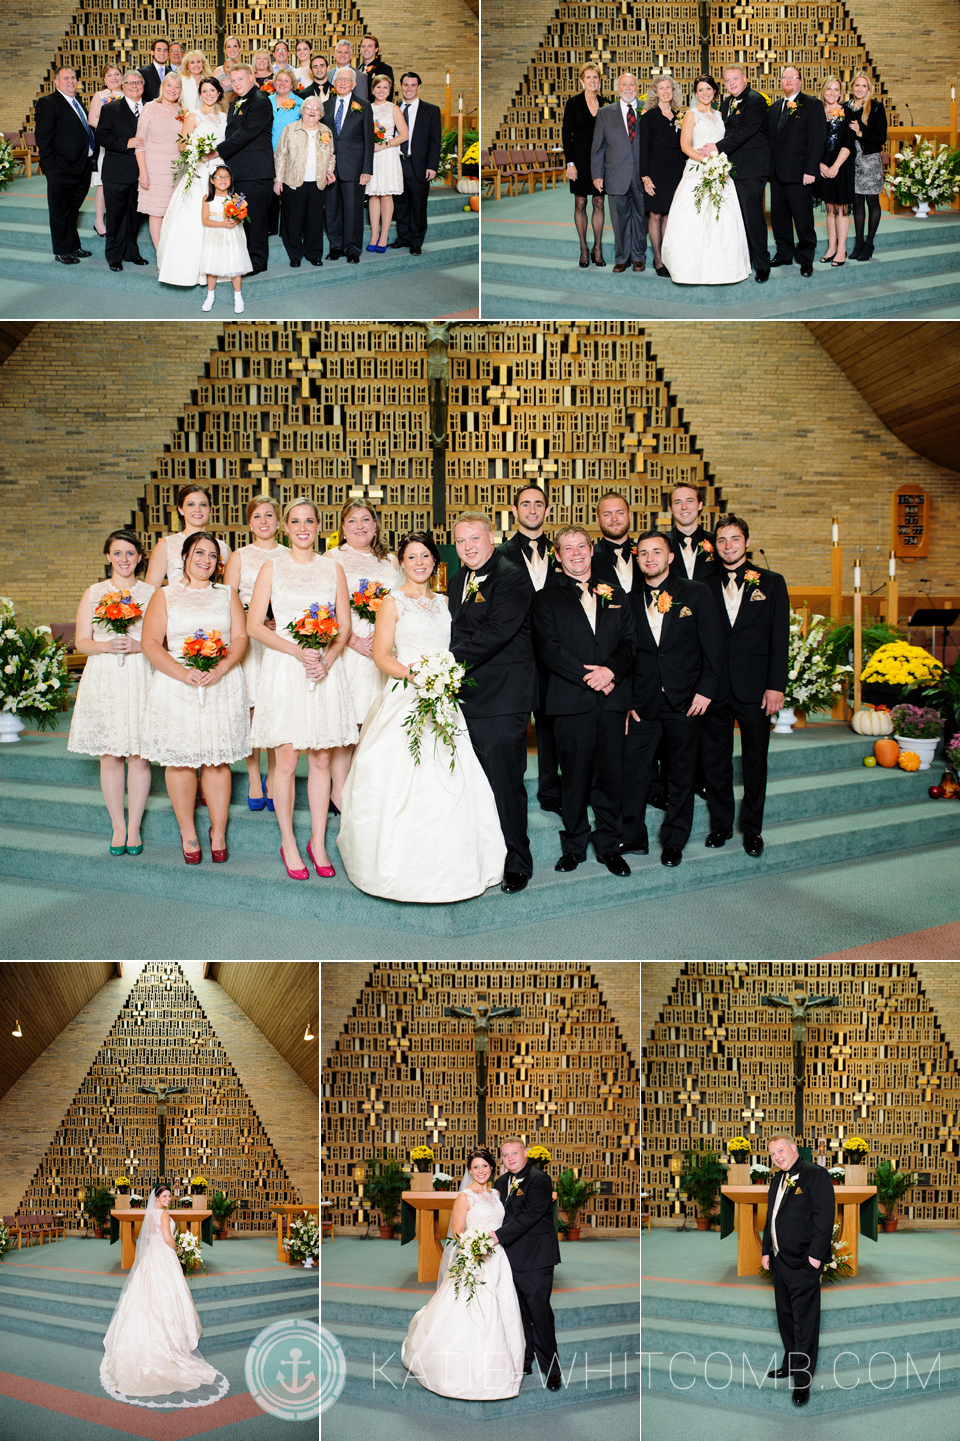 Family Formals at Little Flower Catholic Church in South Bend after a wedding ceremony